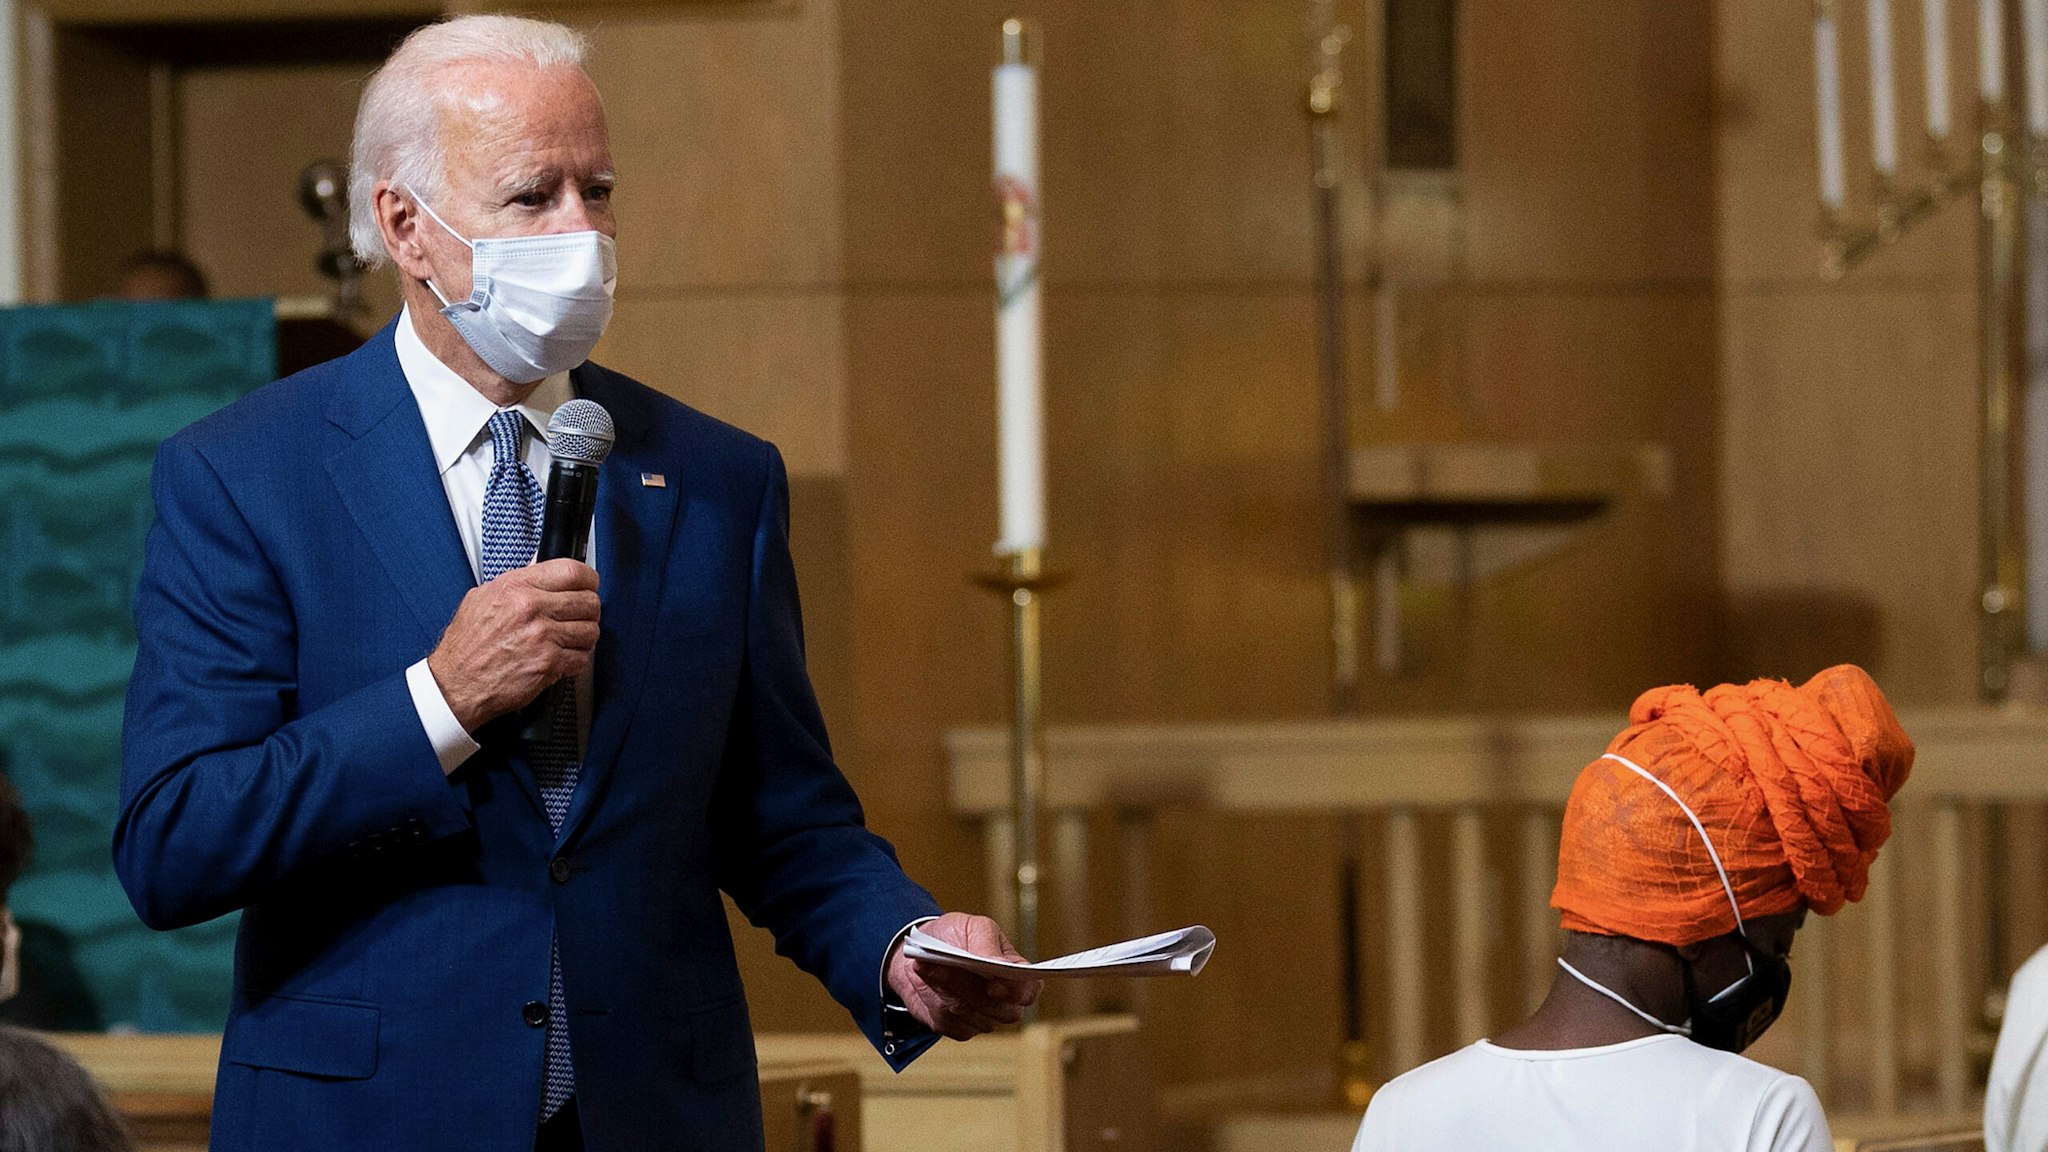 Highlights from Biden’s trip to Kenosha to meet with Jacob Blake family Biden Tells Audience: ‘They’ll Shoot Me’ Woman Told She Had To Read Off Script